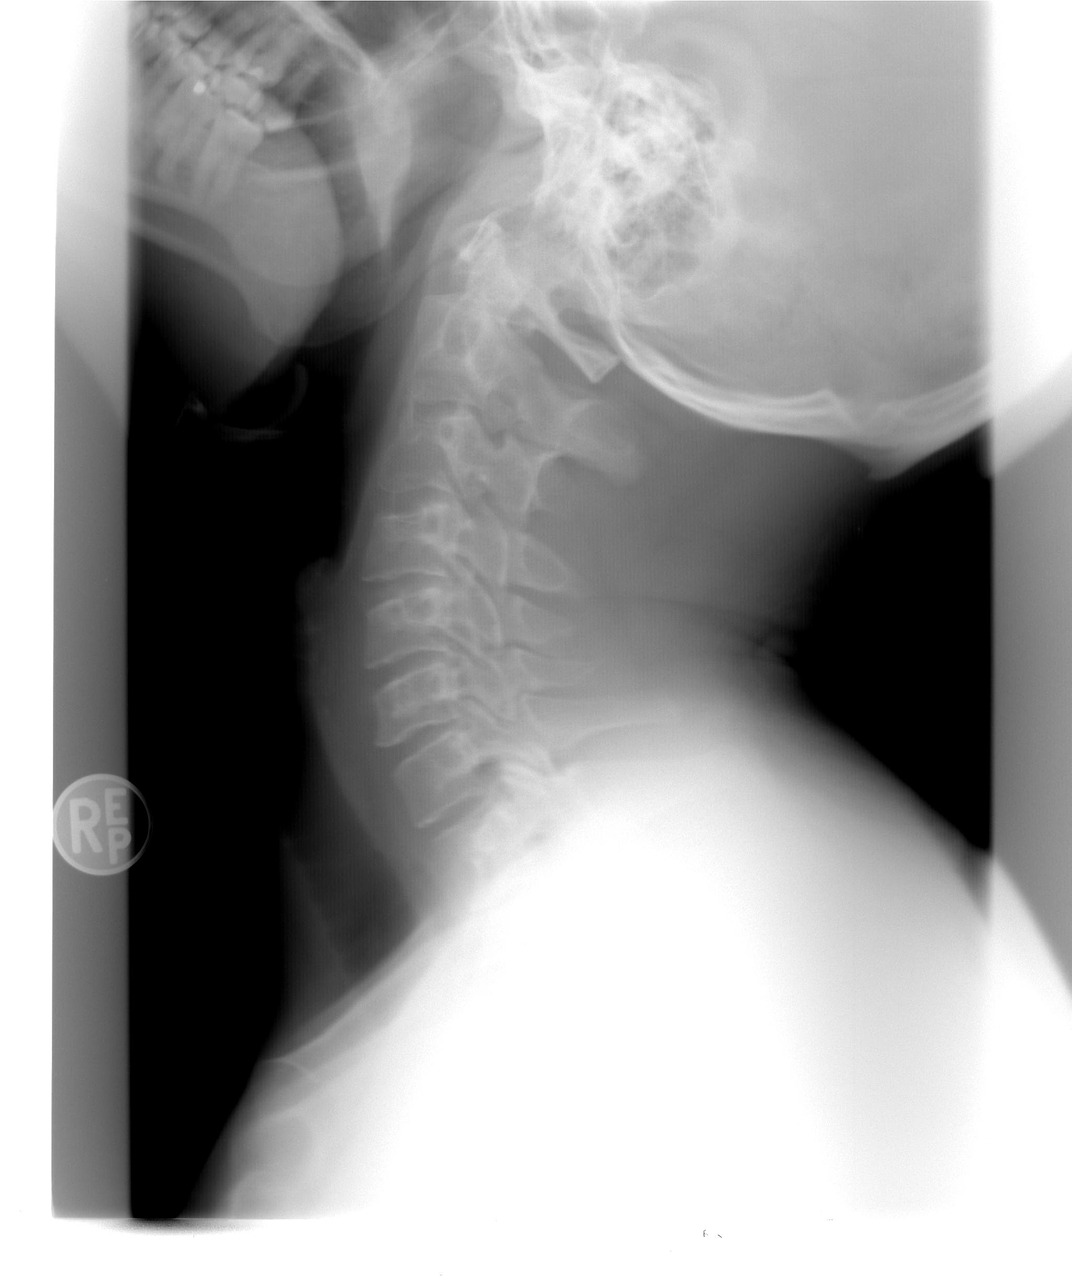 xray cervical spine healthcare free photo